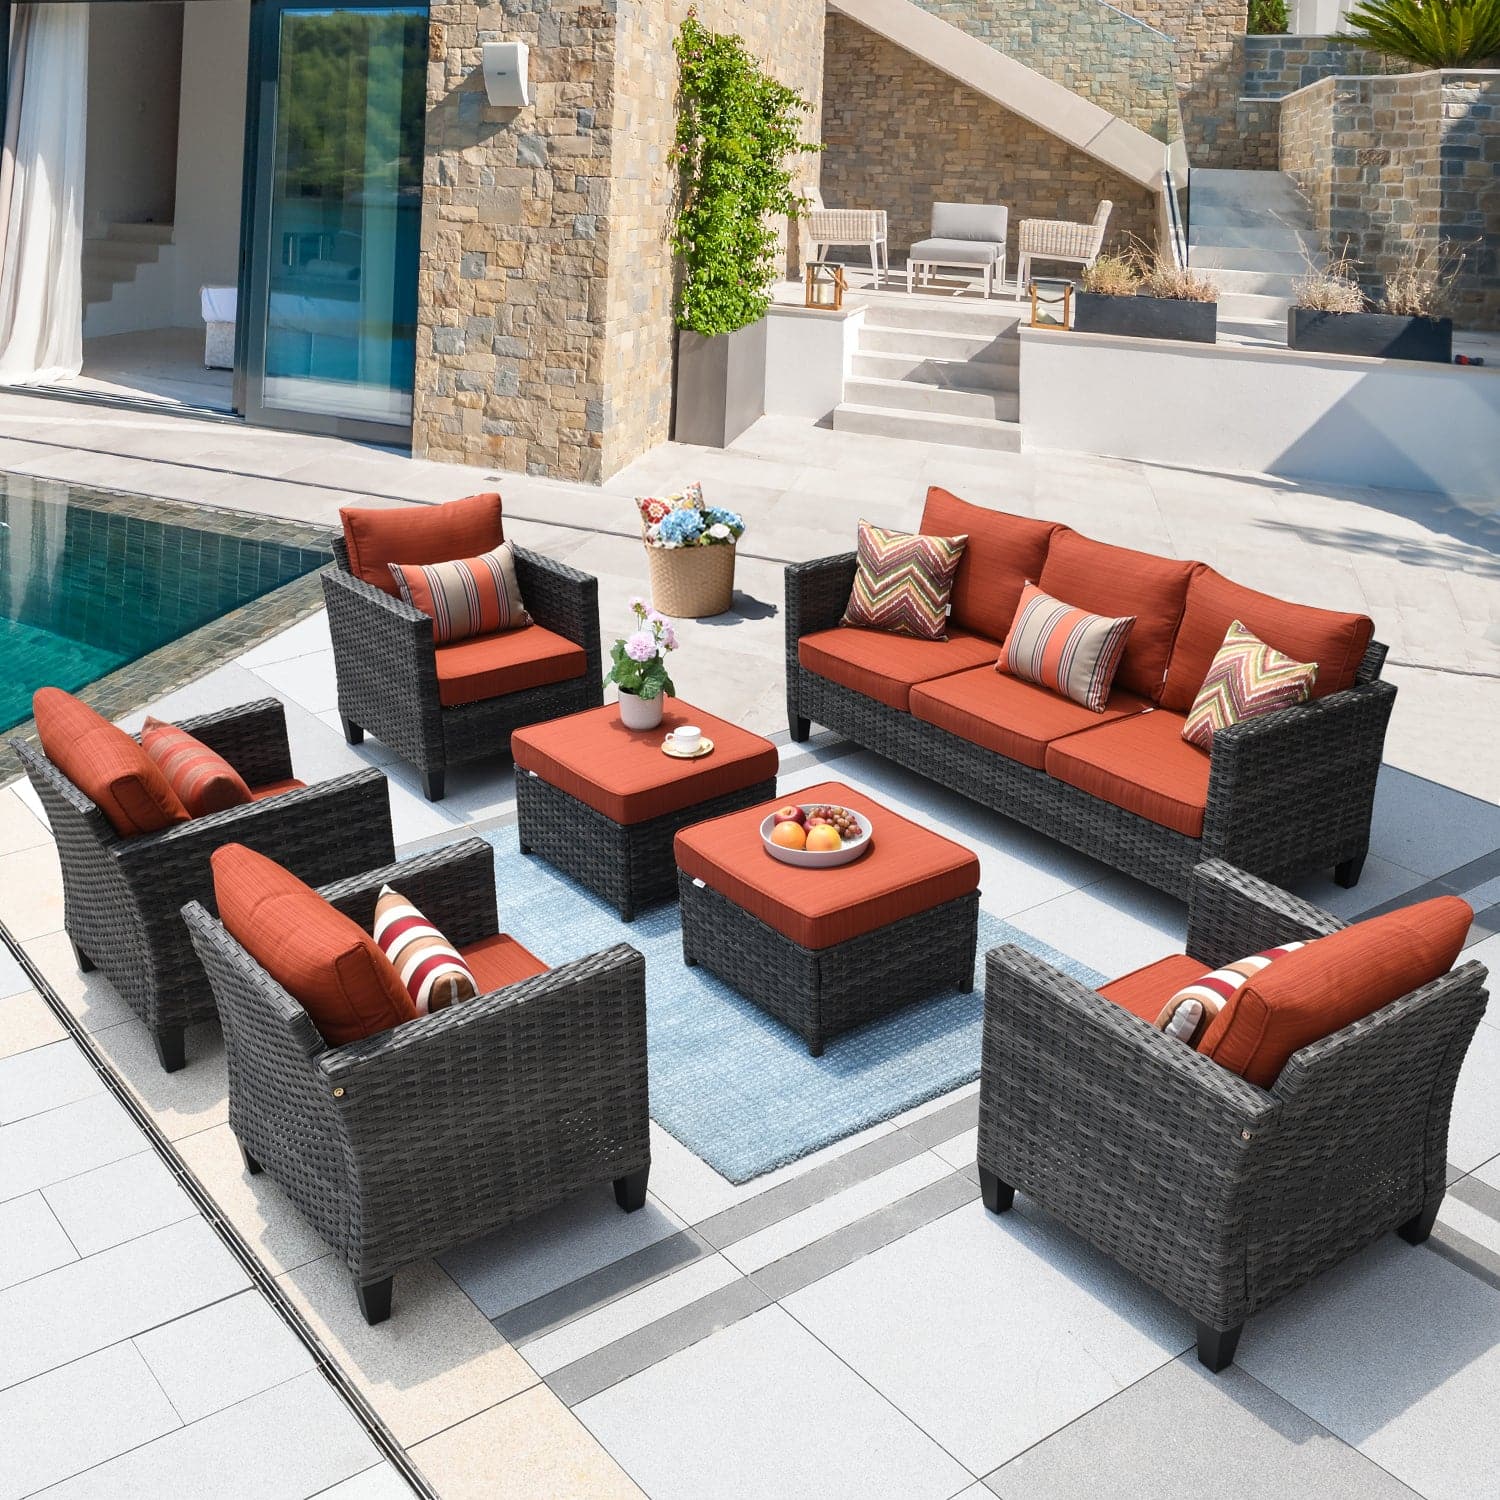 Ovios Patio Furniture Set New Vultros 7-Piece High Back with Cushions